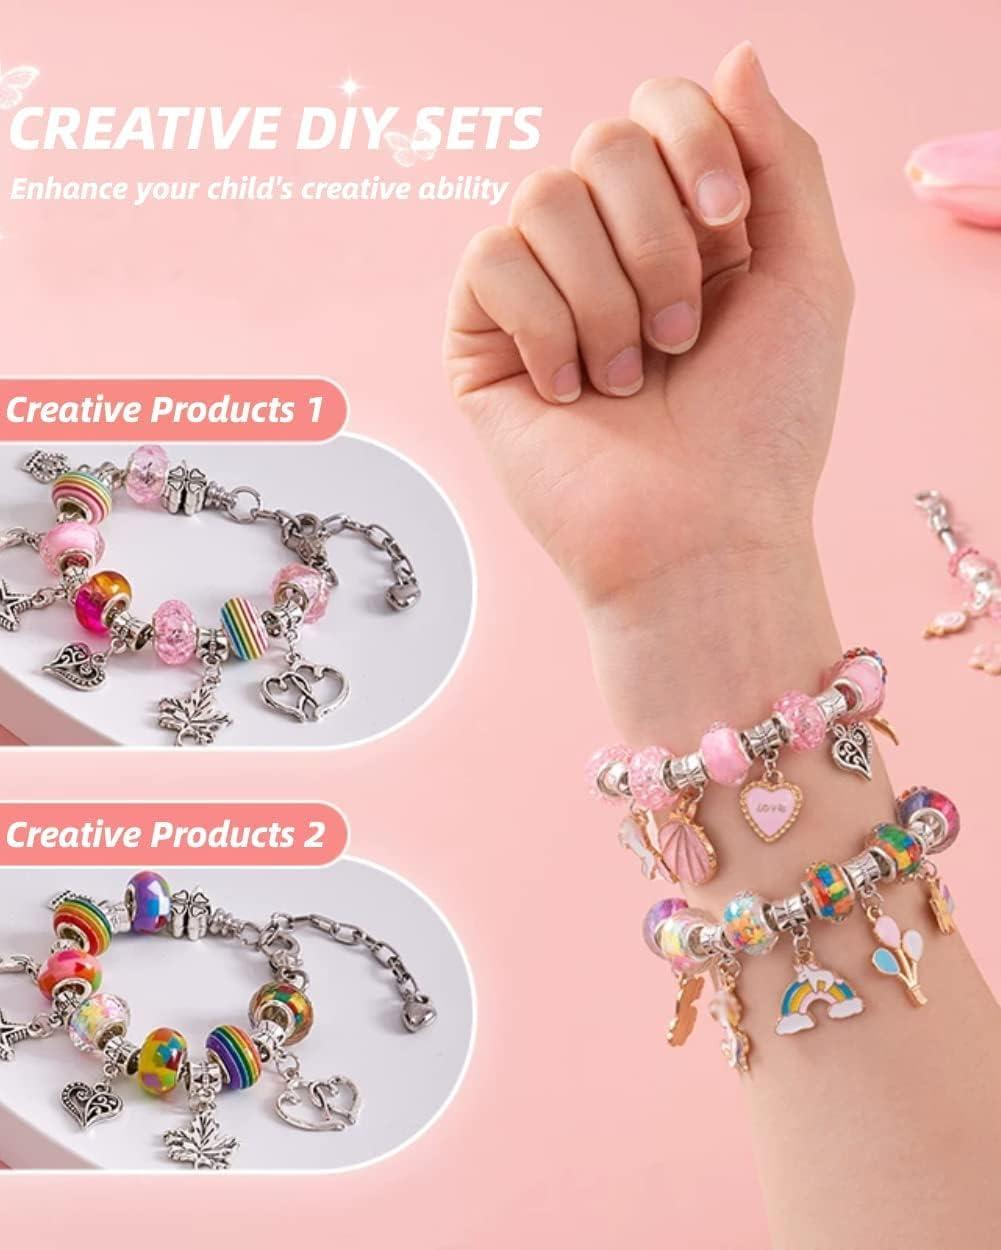 146 Pcs of DIY Charm Bracelet Making Kit, Wowhalolo Bangle jewelry making  kit, Unicorn Gift Box Set with Beads, Bracelets, Jewelry Tools Pliers,  Snake Chain Jewelry, Suitable for Girls Teens Age 6-18. :